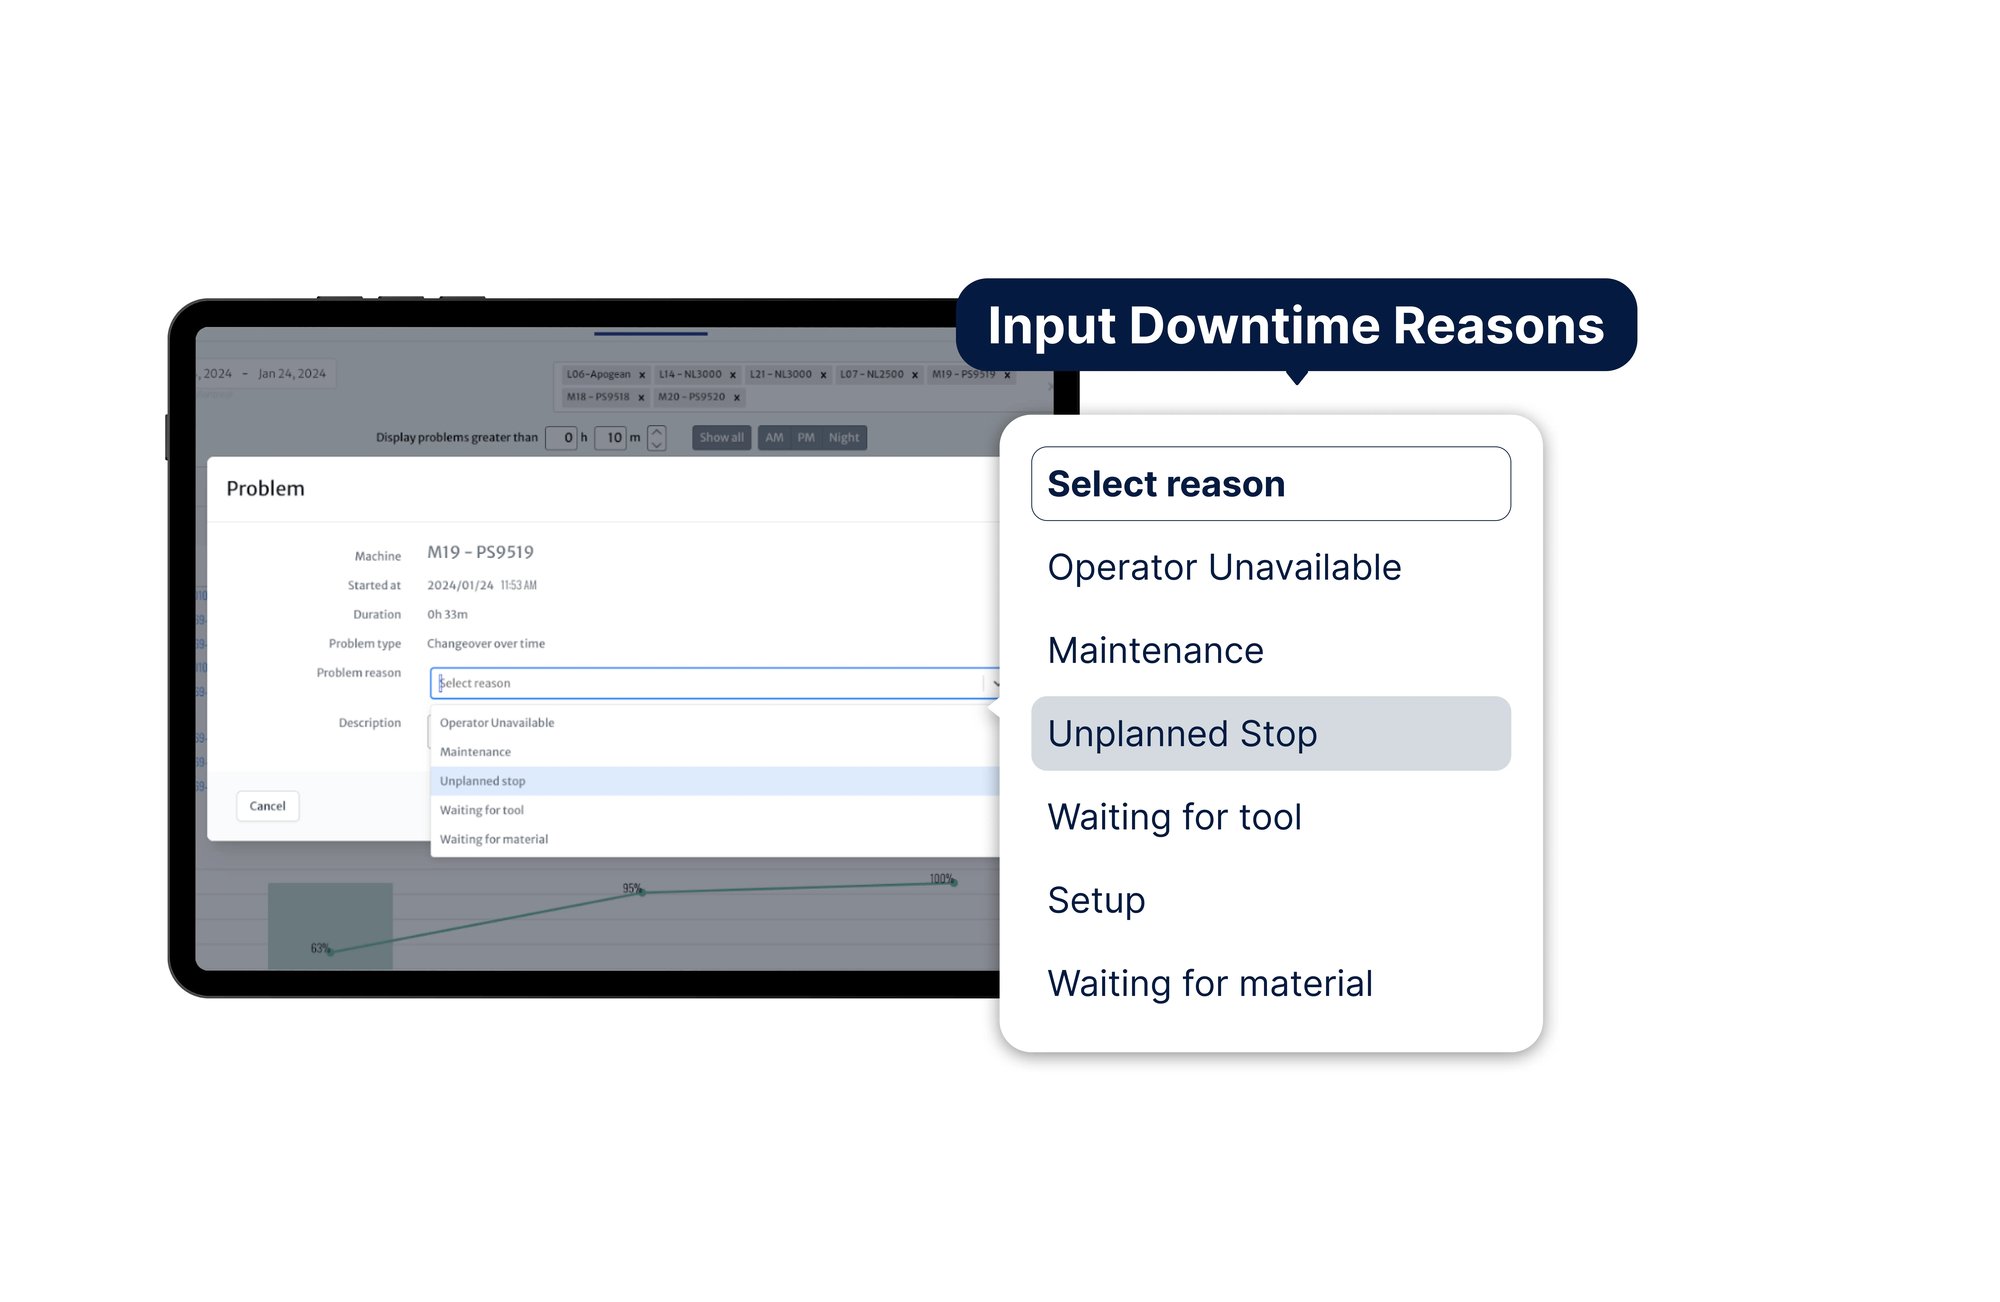 JITbase interface for the CNC operator to enter machine downtime reasons